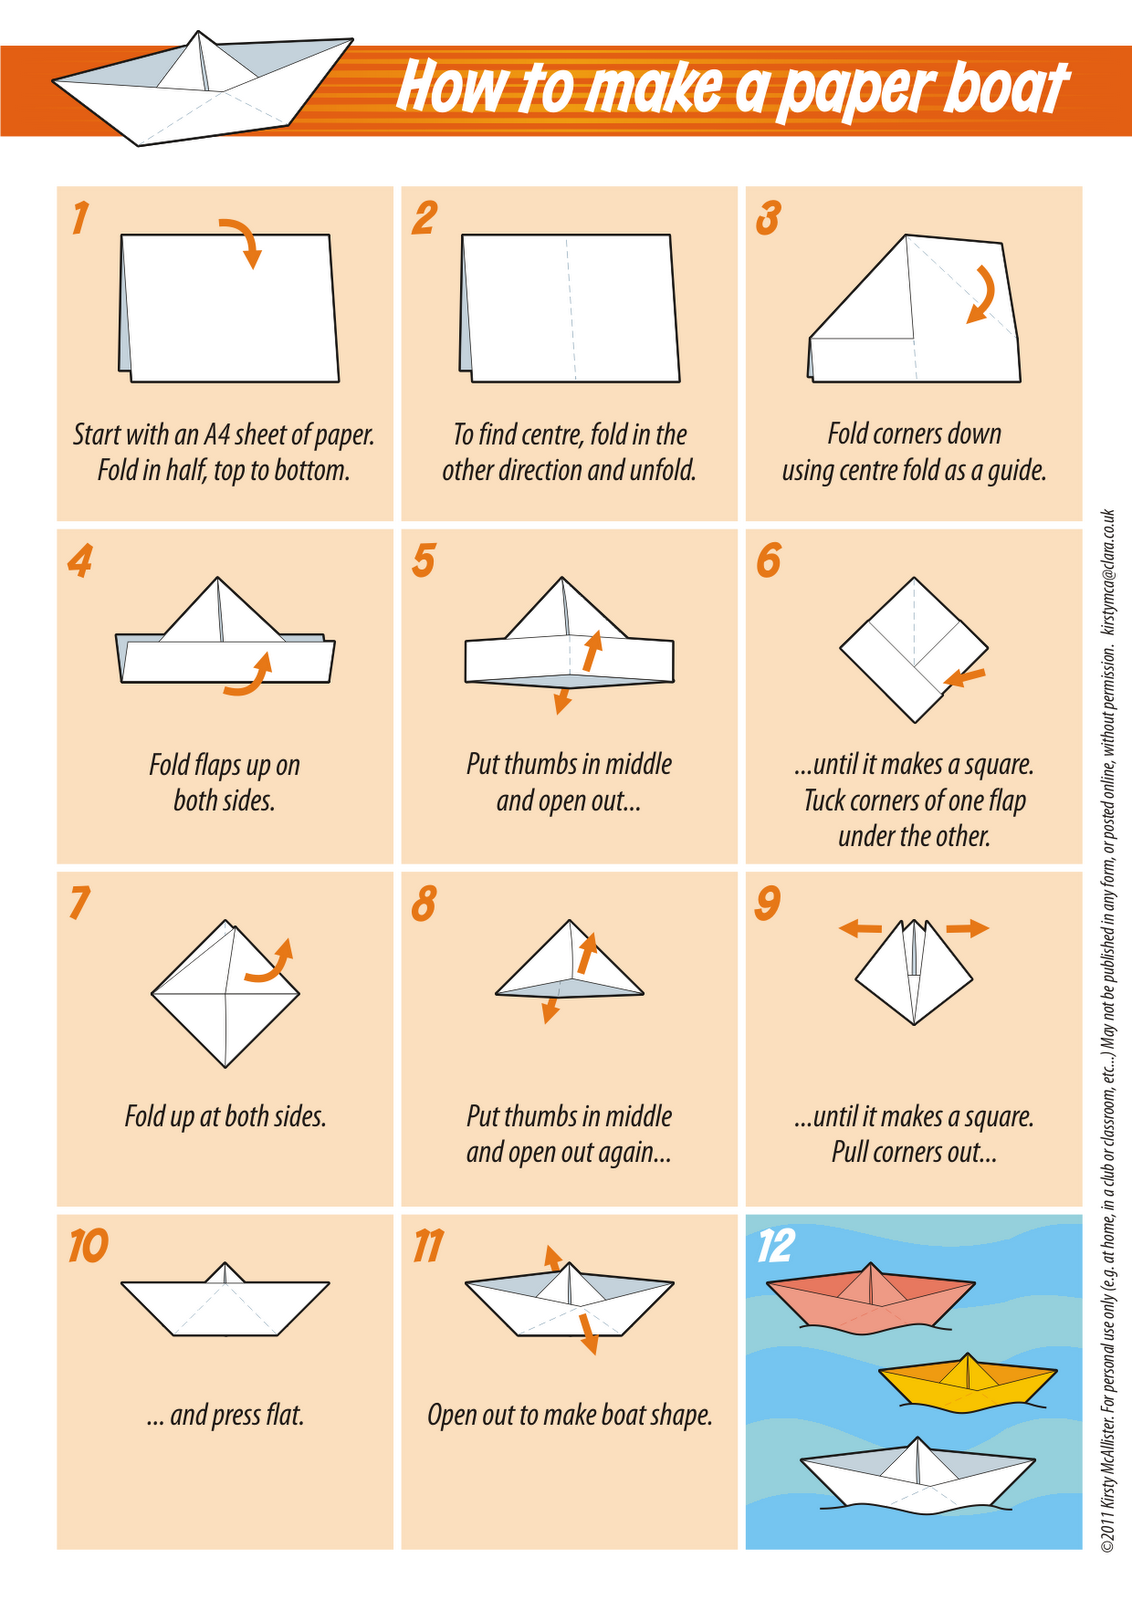 Miscellany of Randomness: Paper boat